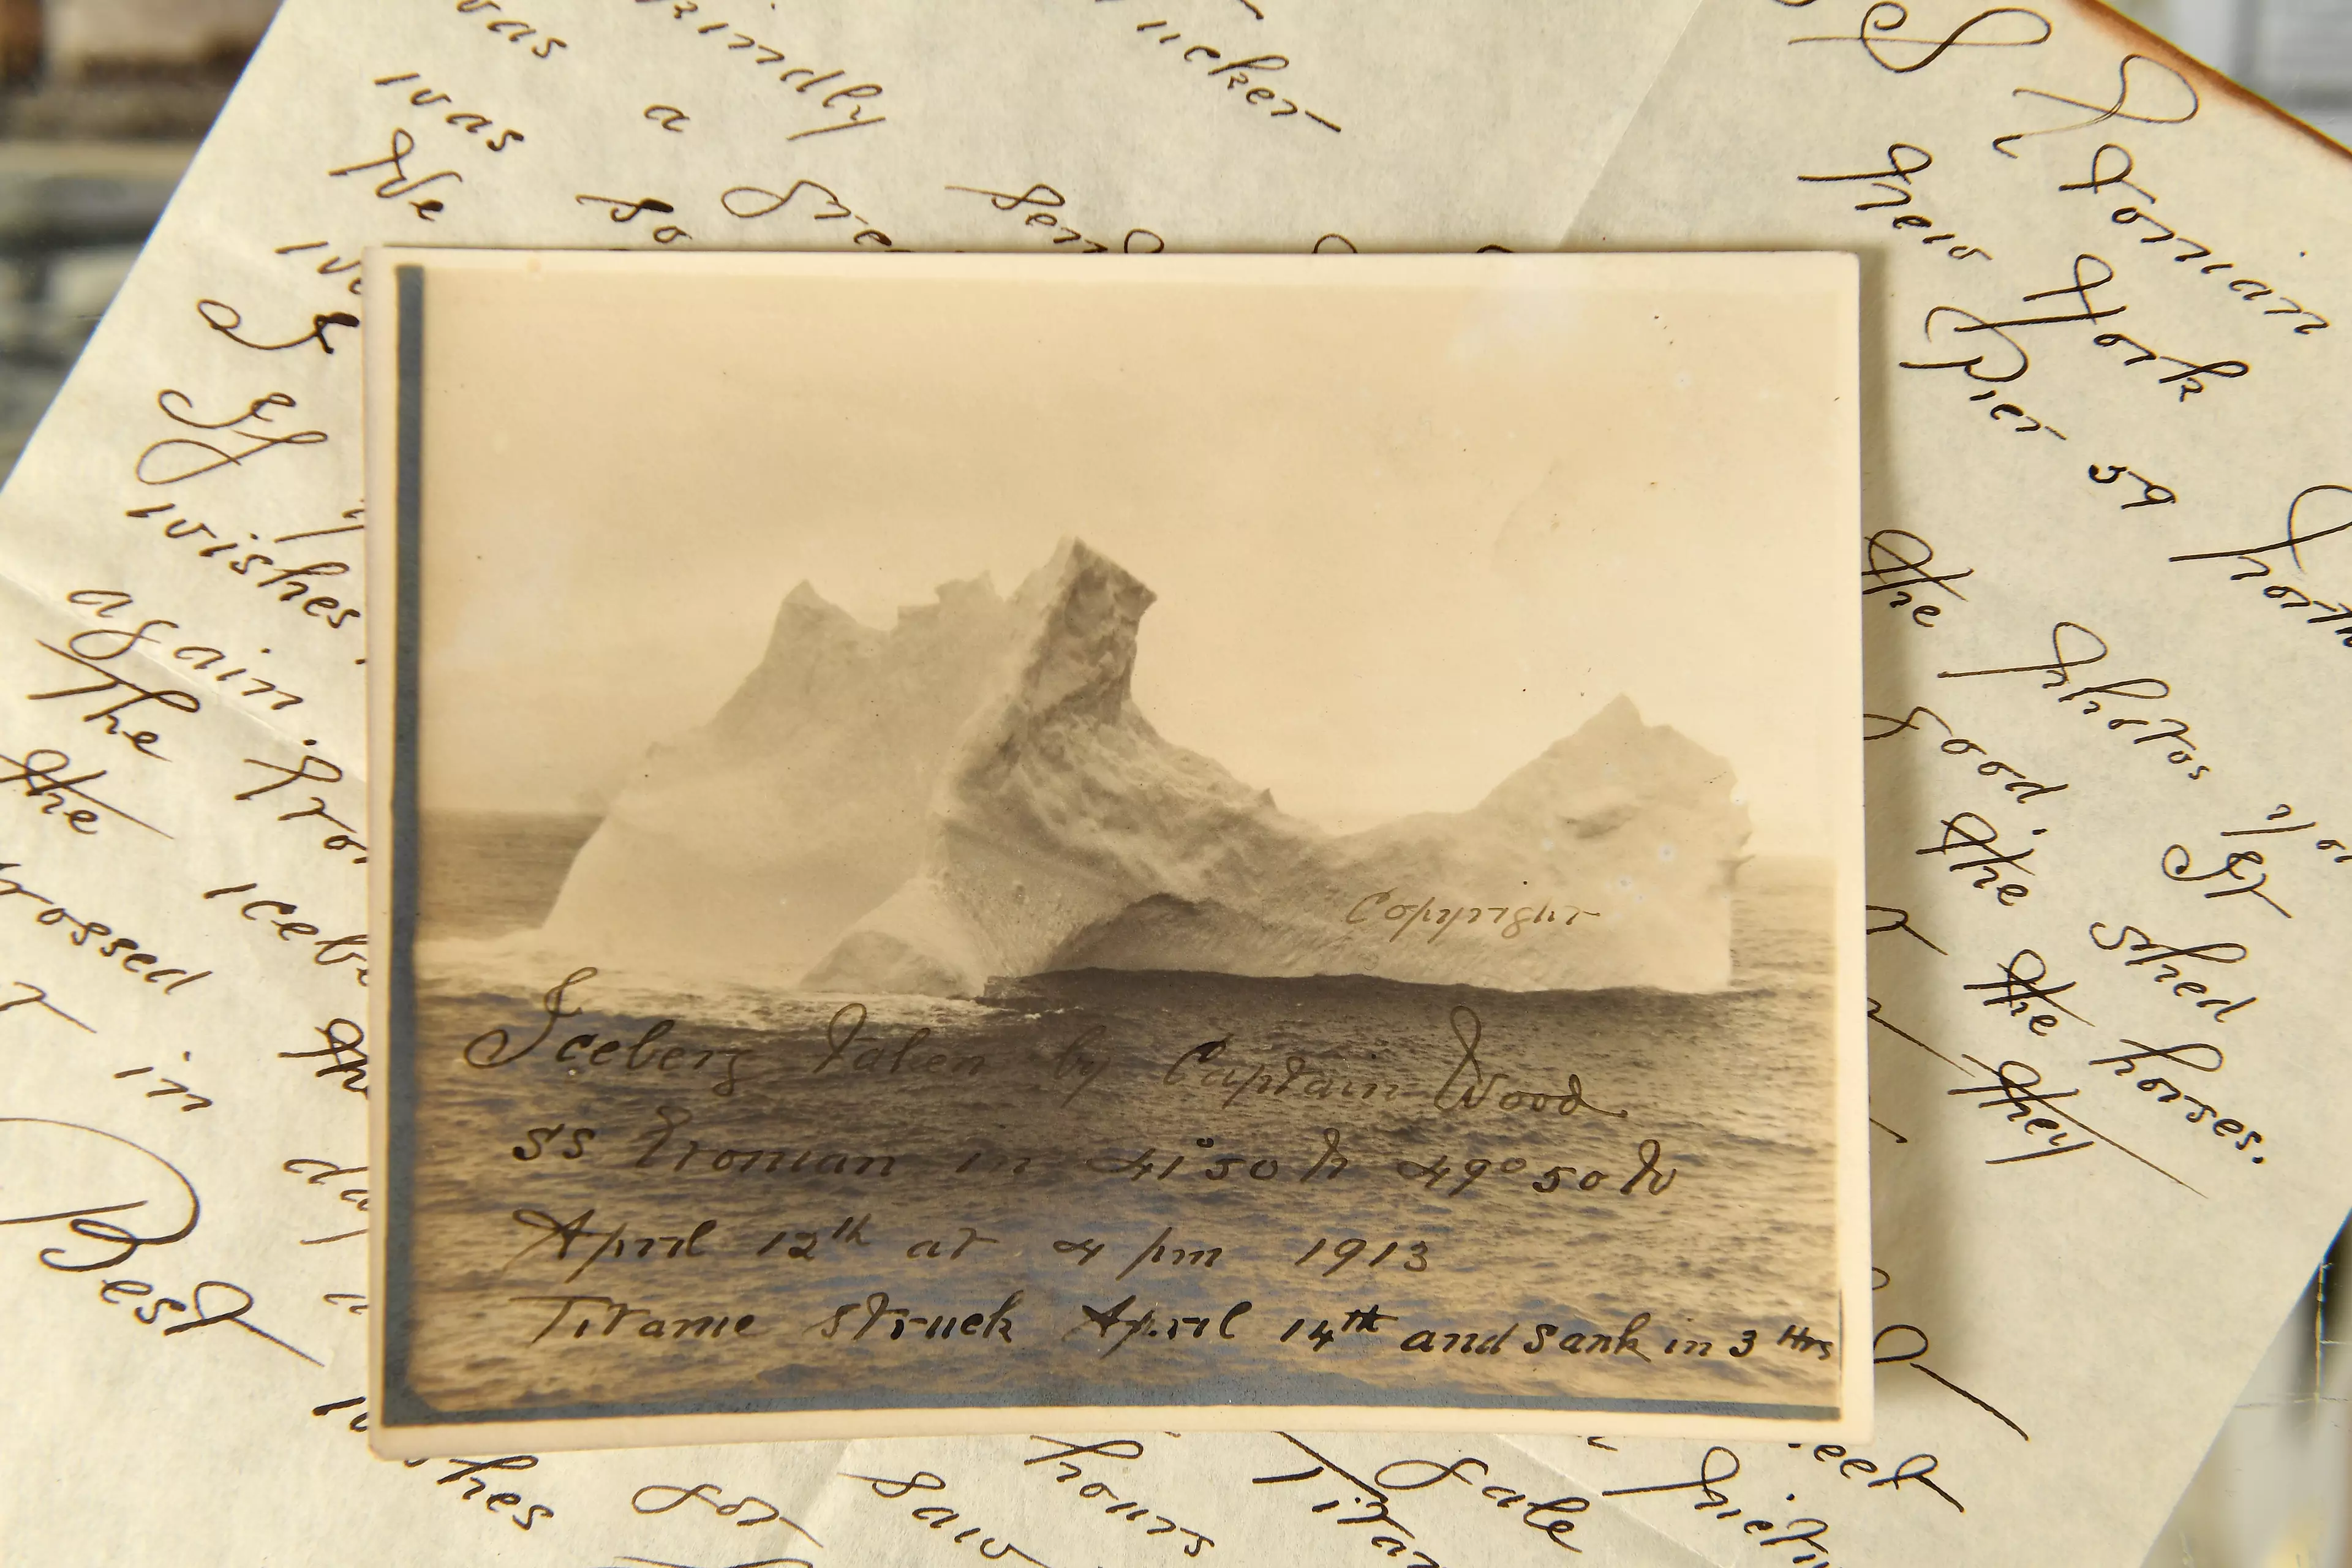 The photograph and letter.